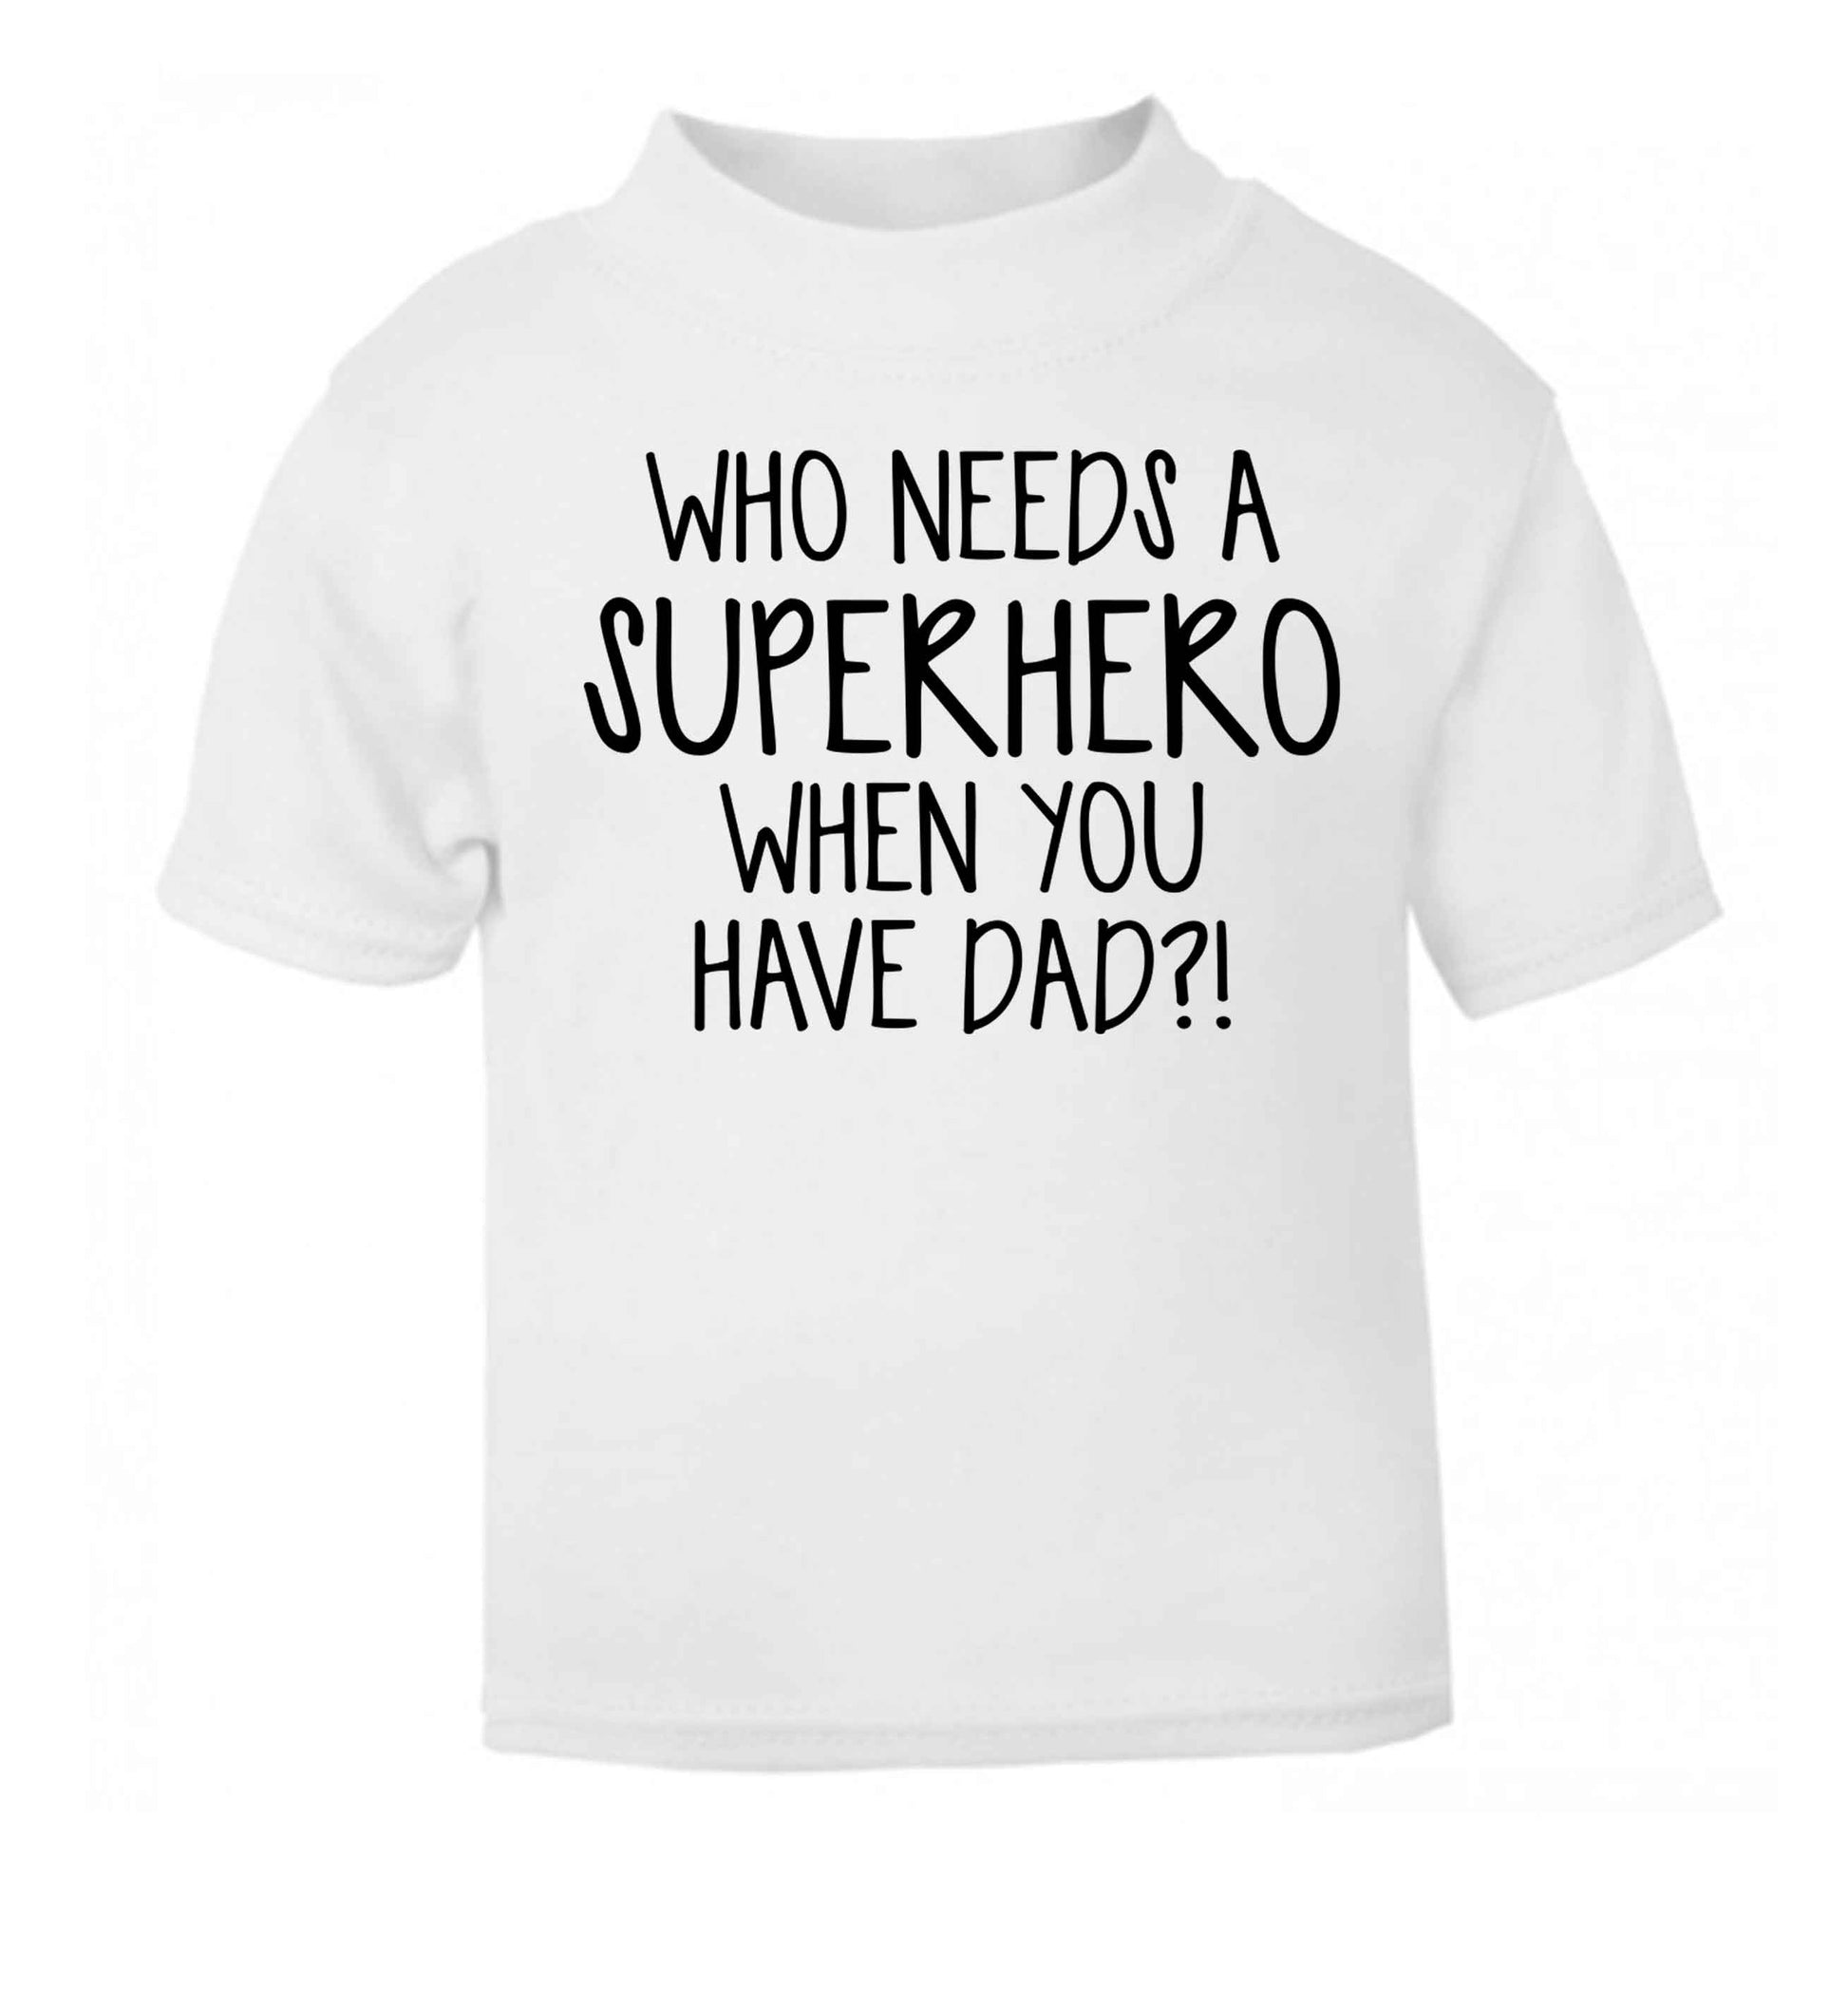 Who needs a superhero when you have dad! white baby toddler Tshirt 2 Years